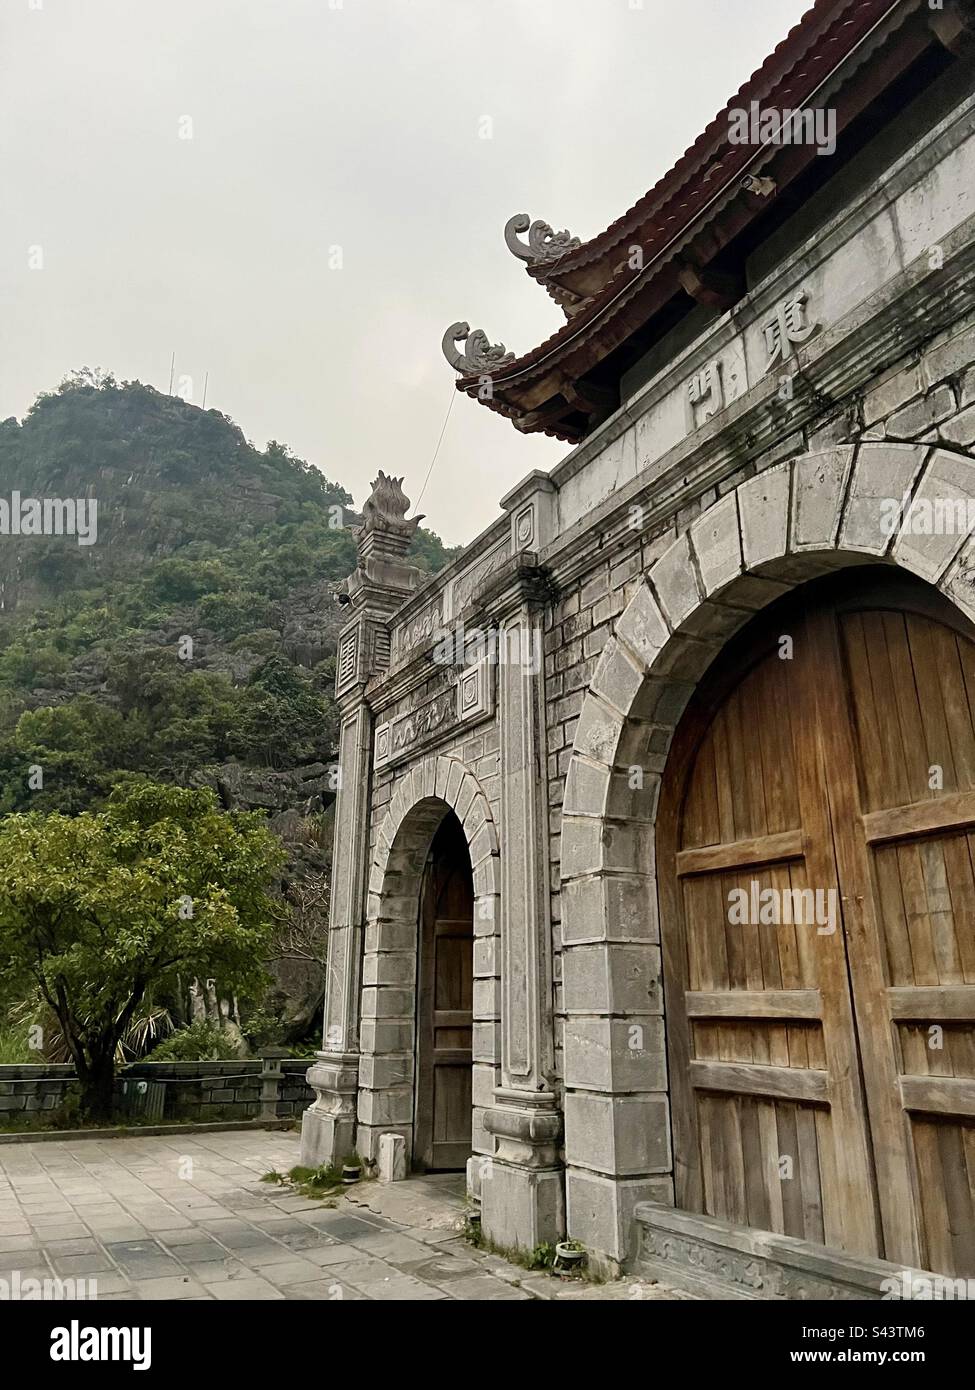 Ancient monument in Asia with foggy mountains and large wooden gate Stock Photo